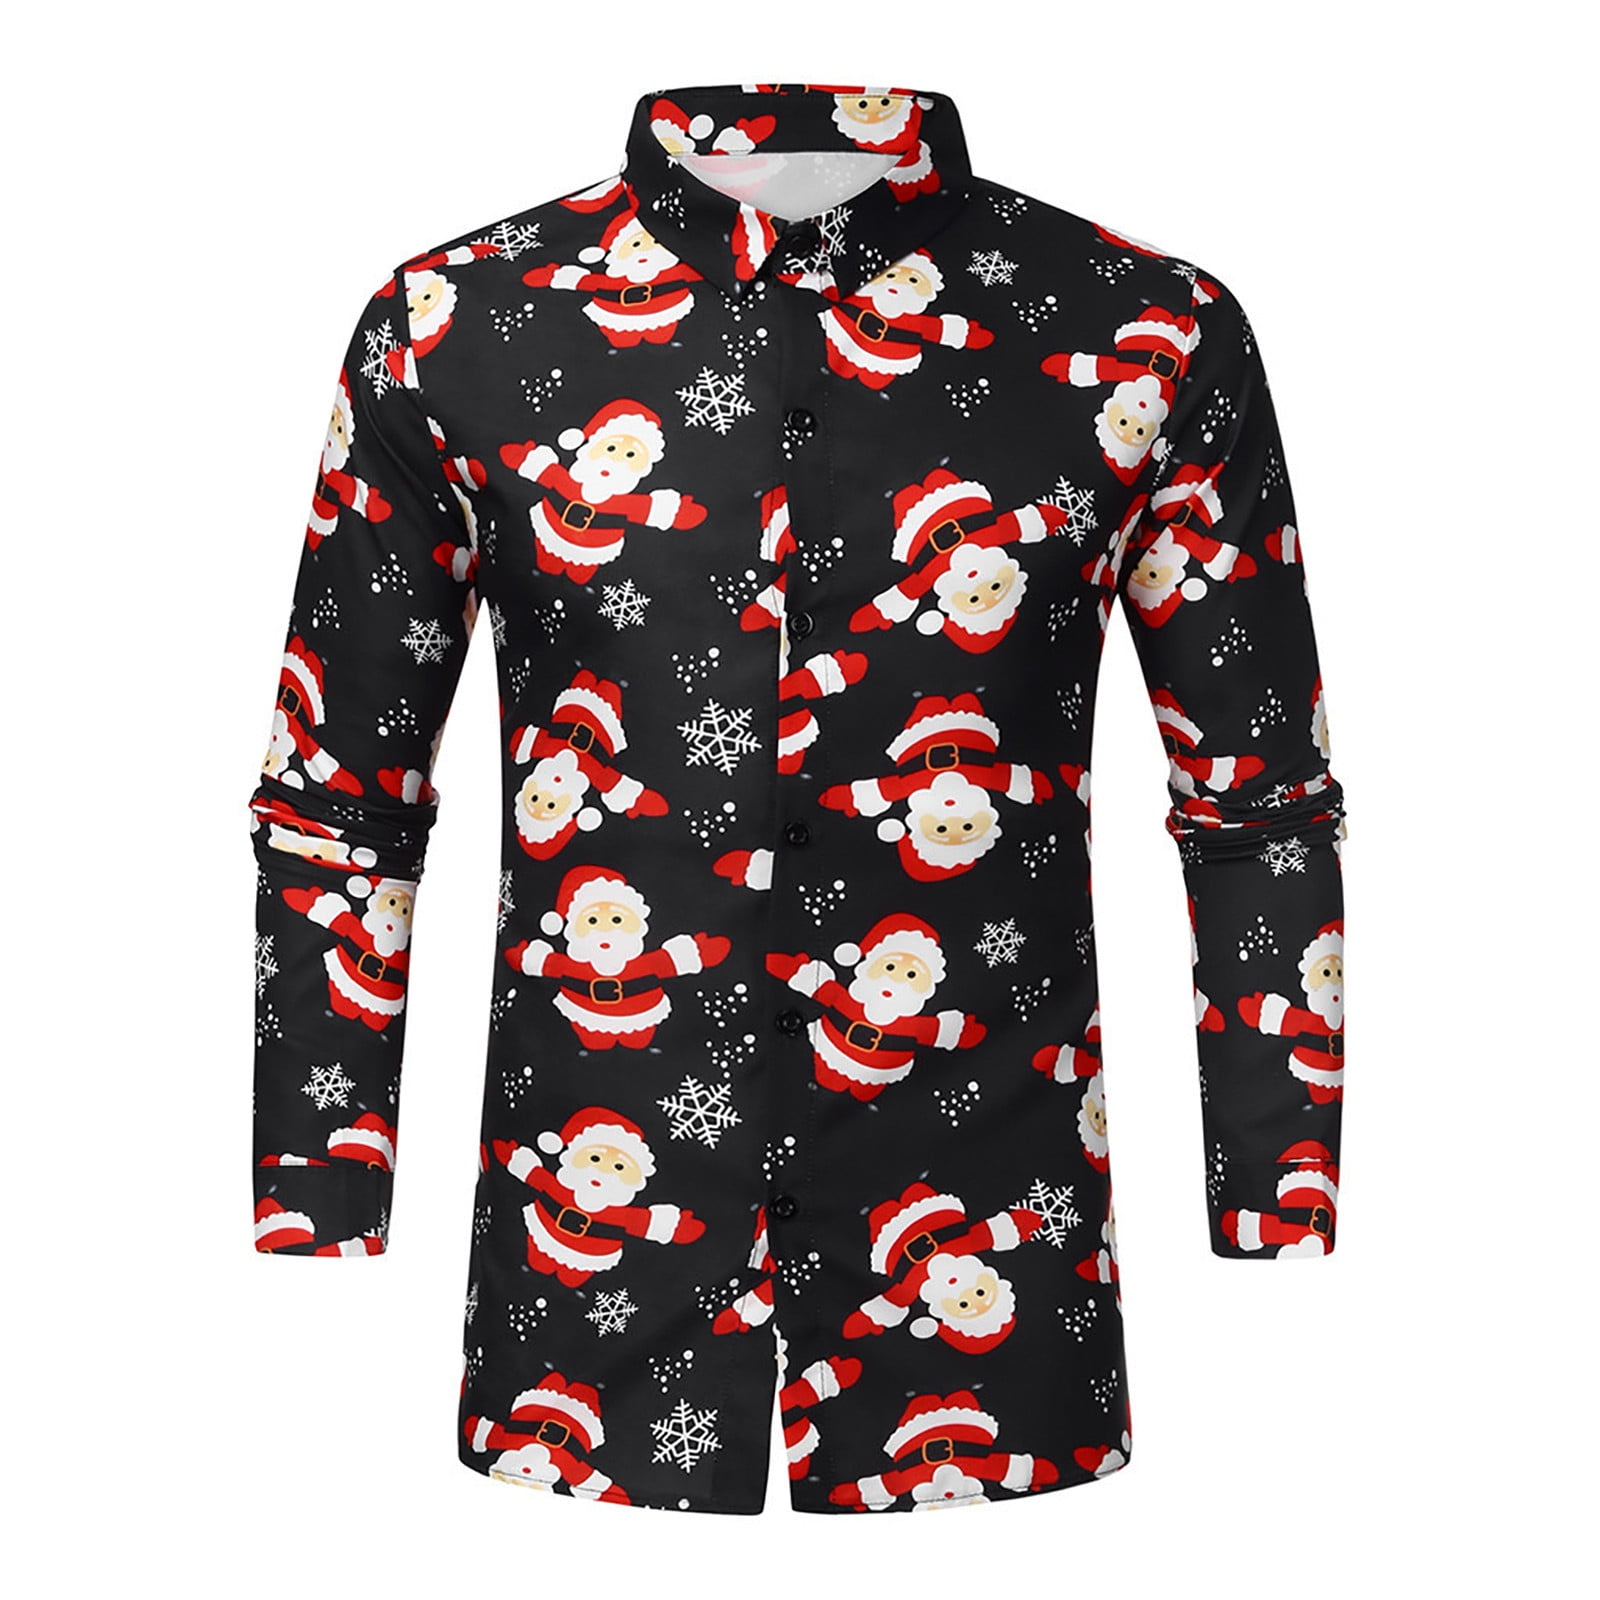 Long Sleeve For Men Men's And Winter Fashion Casual Christmas Shirt Long  Sleeve Top Black L 